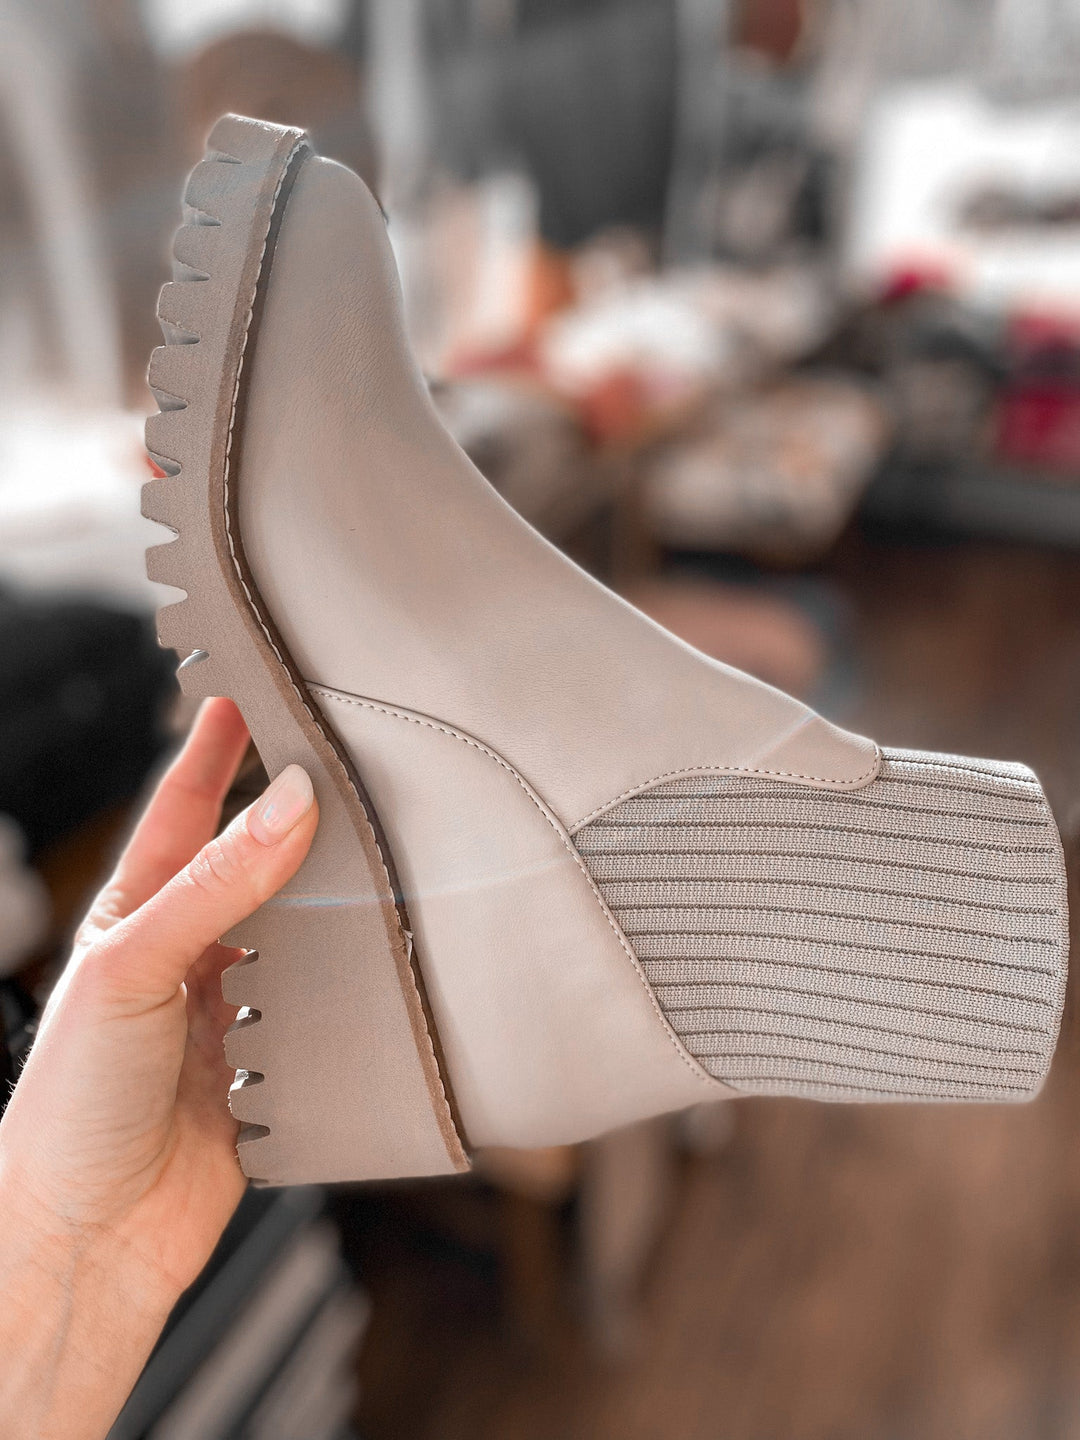 Blaire Taupe Ankle Booties - Coconuts by Matisse